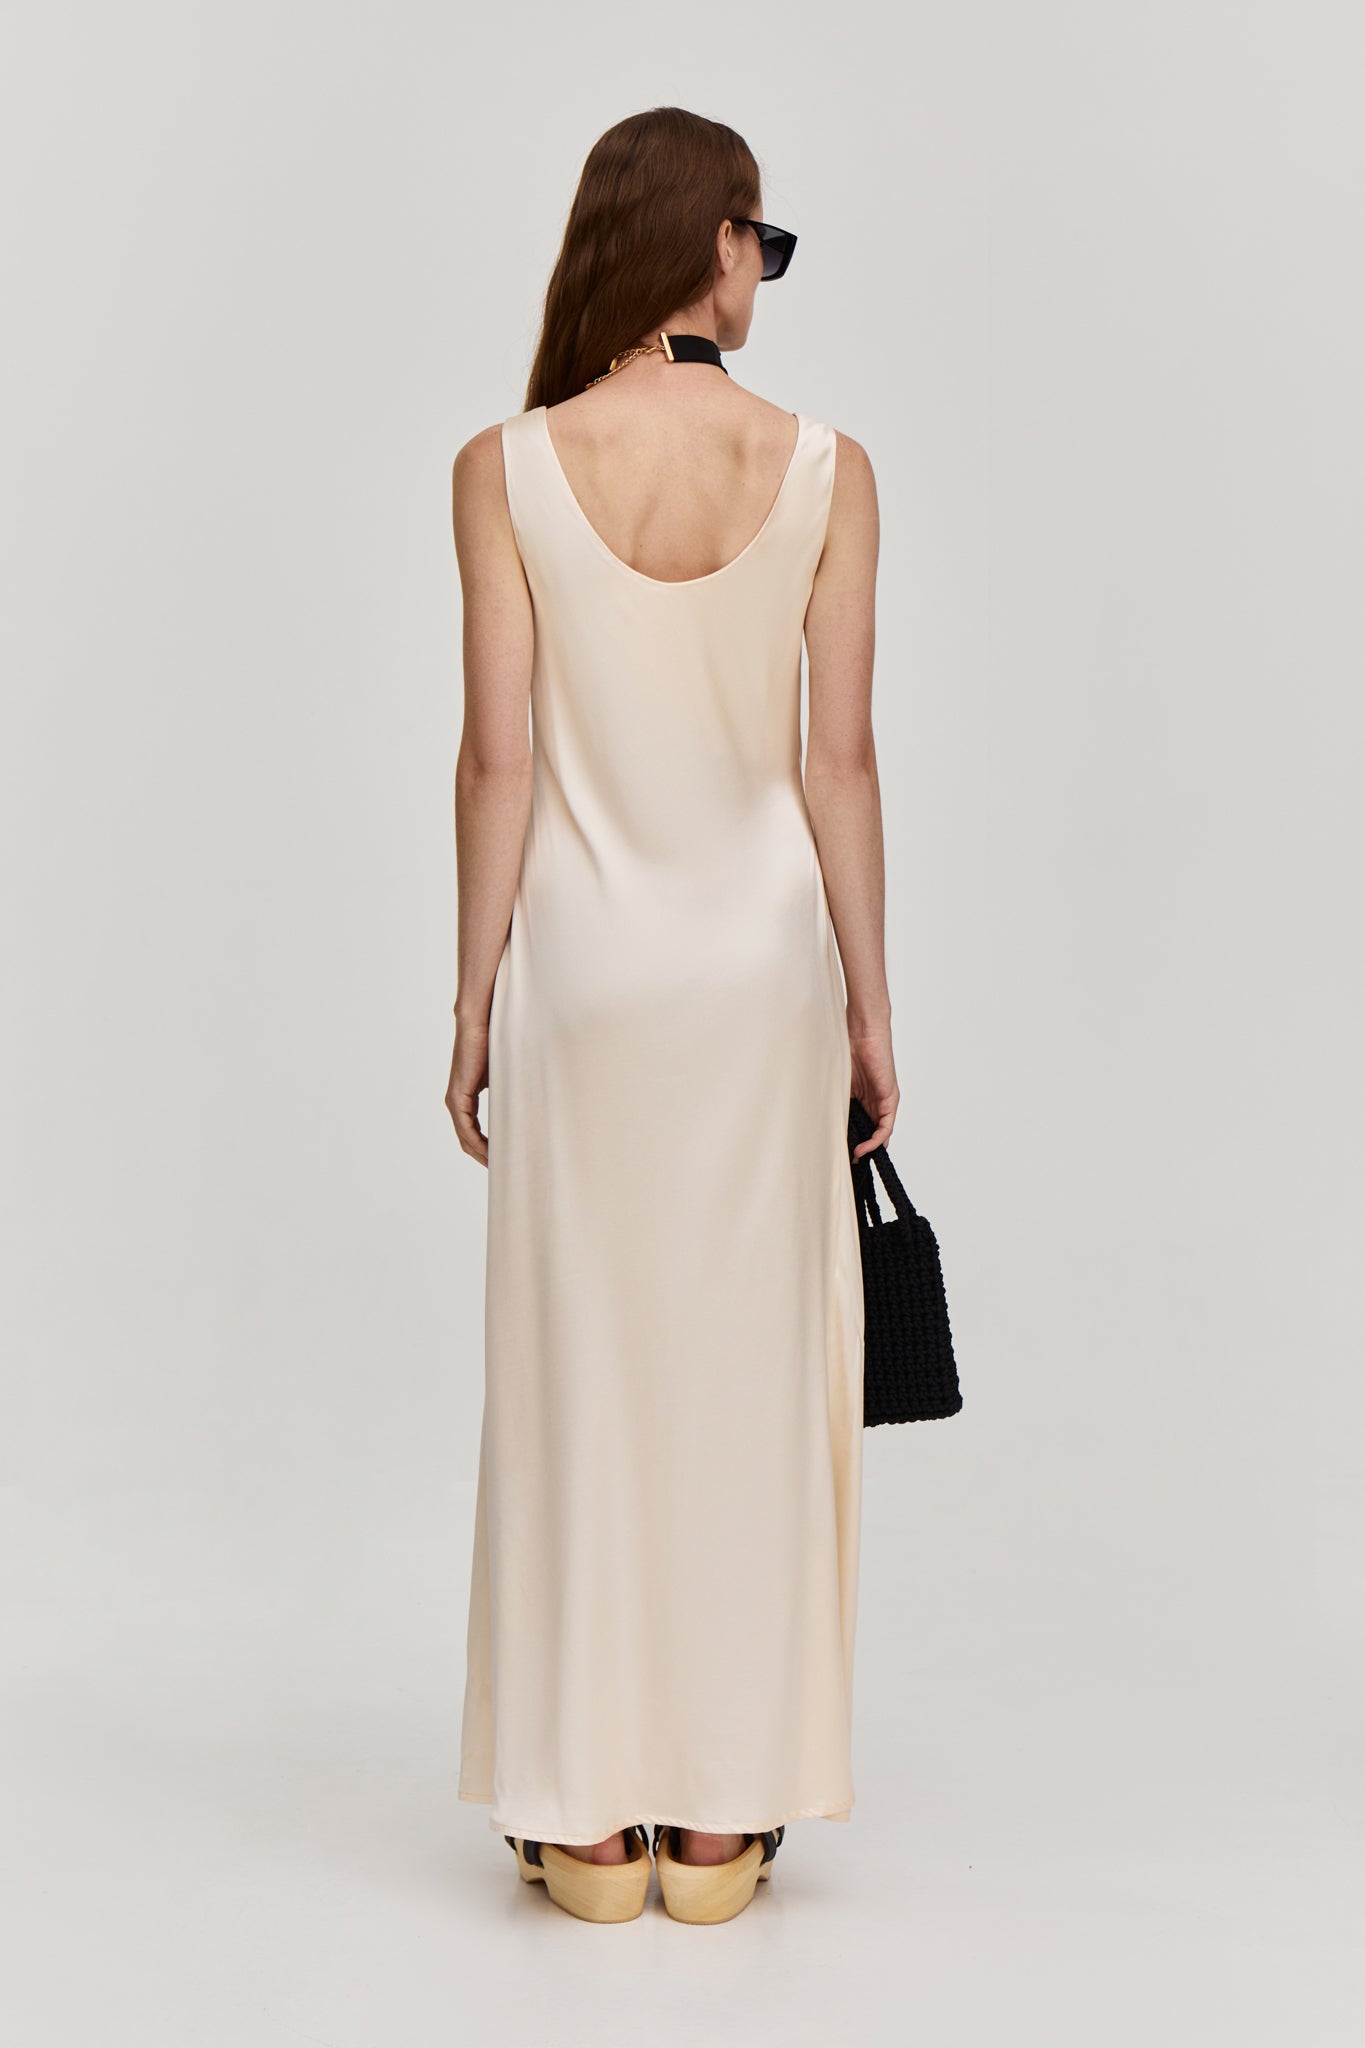 Silky viscose long dress with round neck from FORMA brand